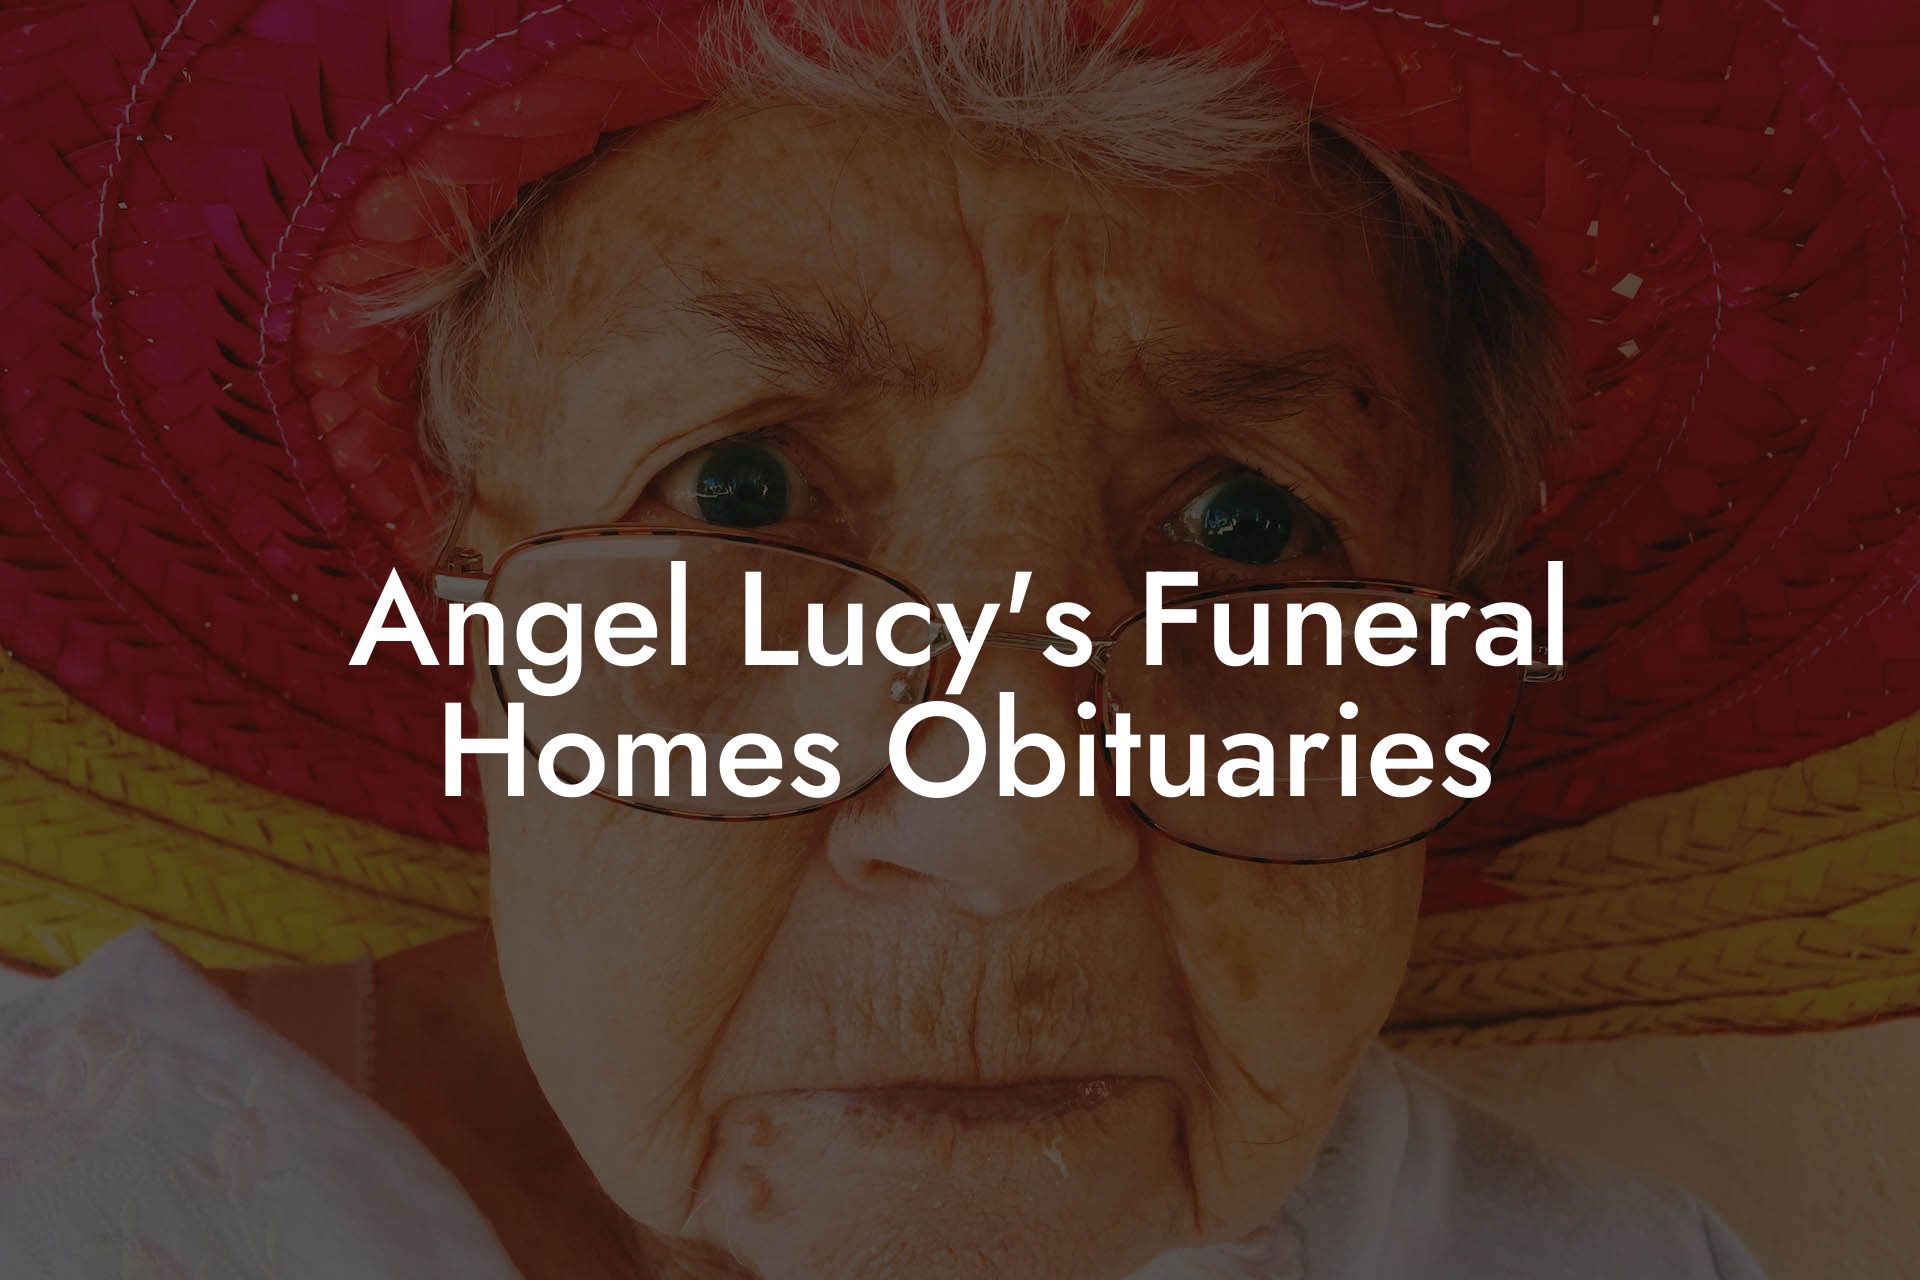 Angel Lucy's Funeral Homes Obituaries